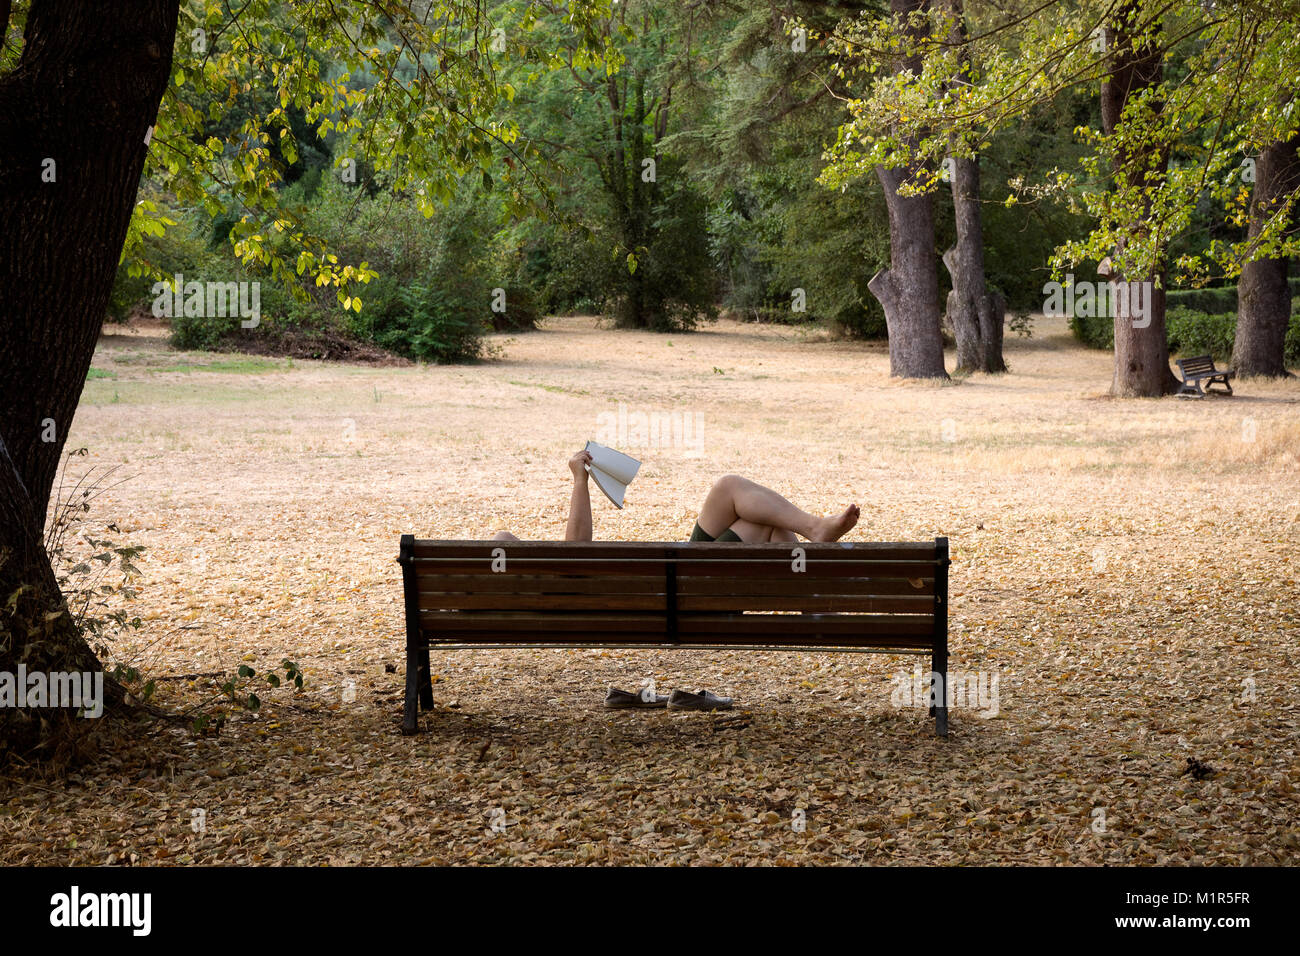 Rome, italy: a man is reading a book lying on a bench in a park of Rome Stock Photo